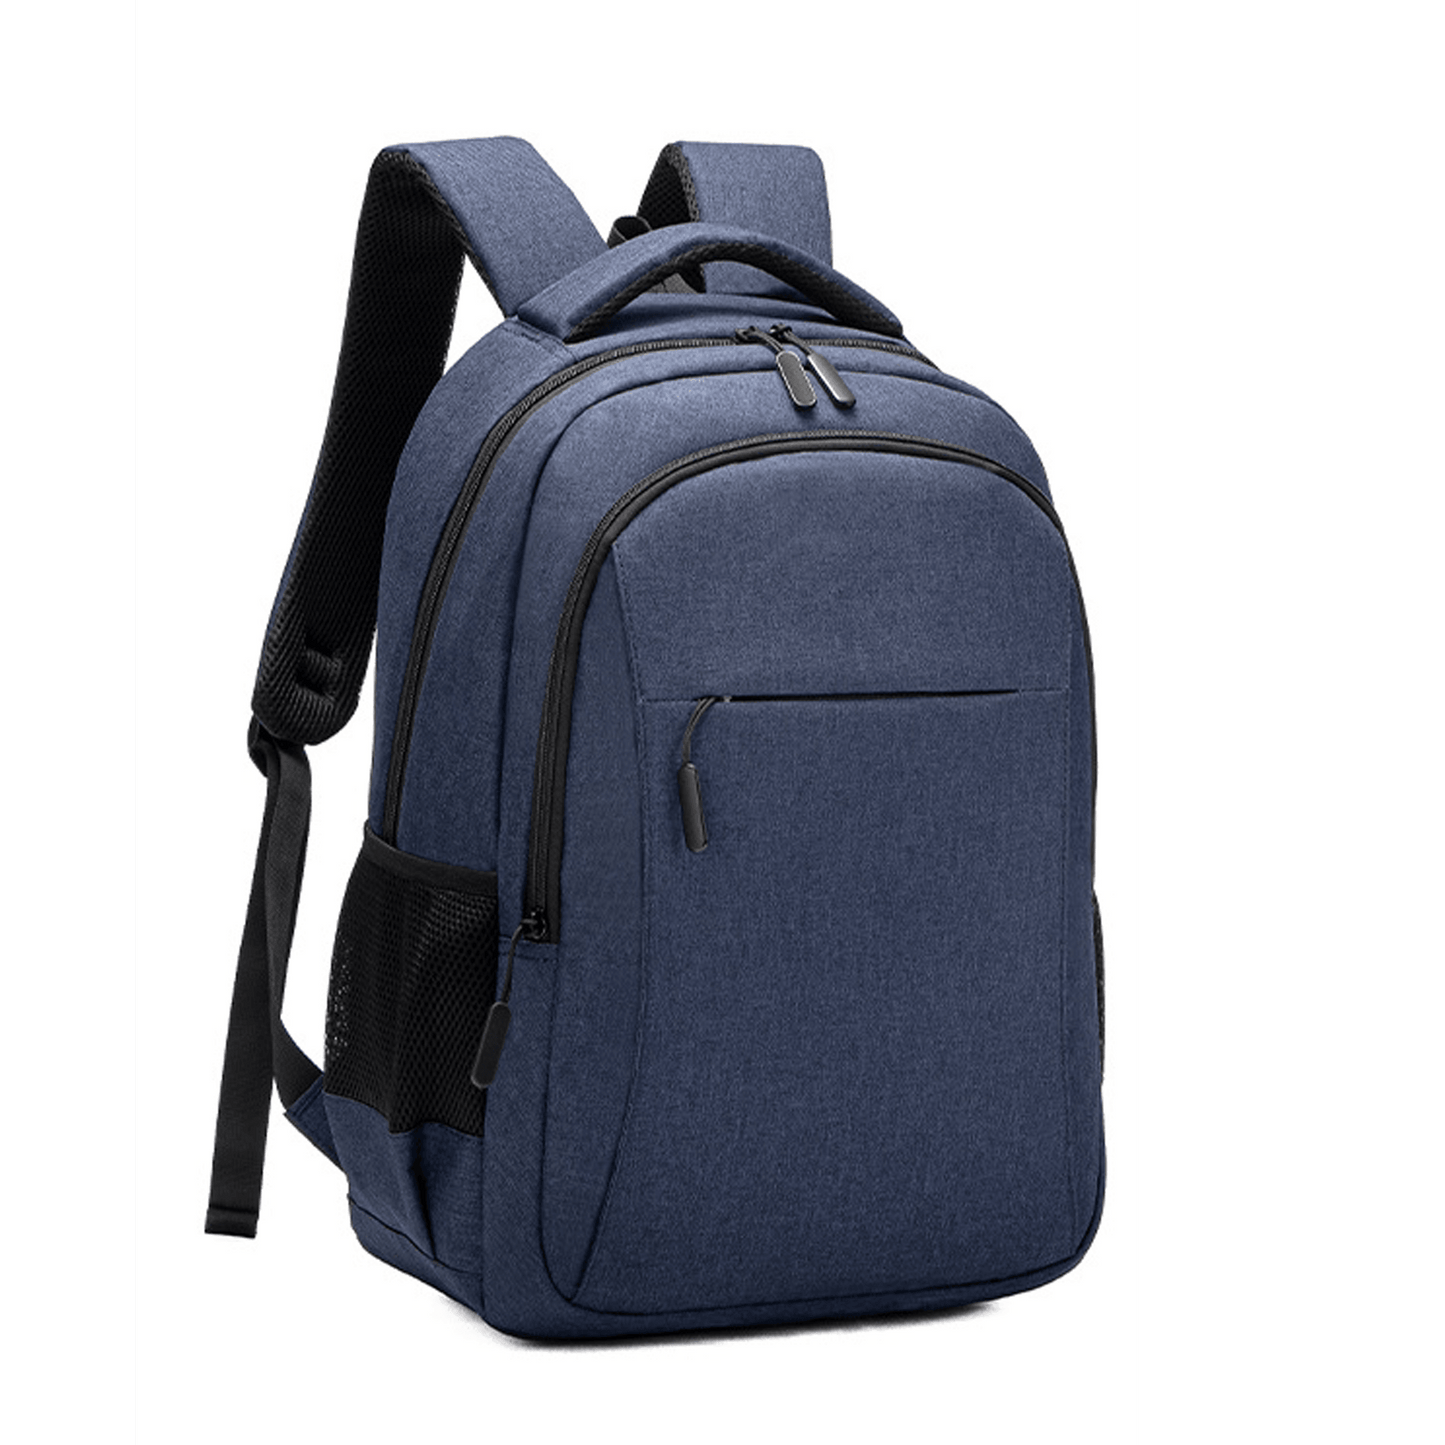 Drake Backpack - San Michelle Bags suitcase nz